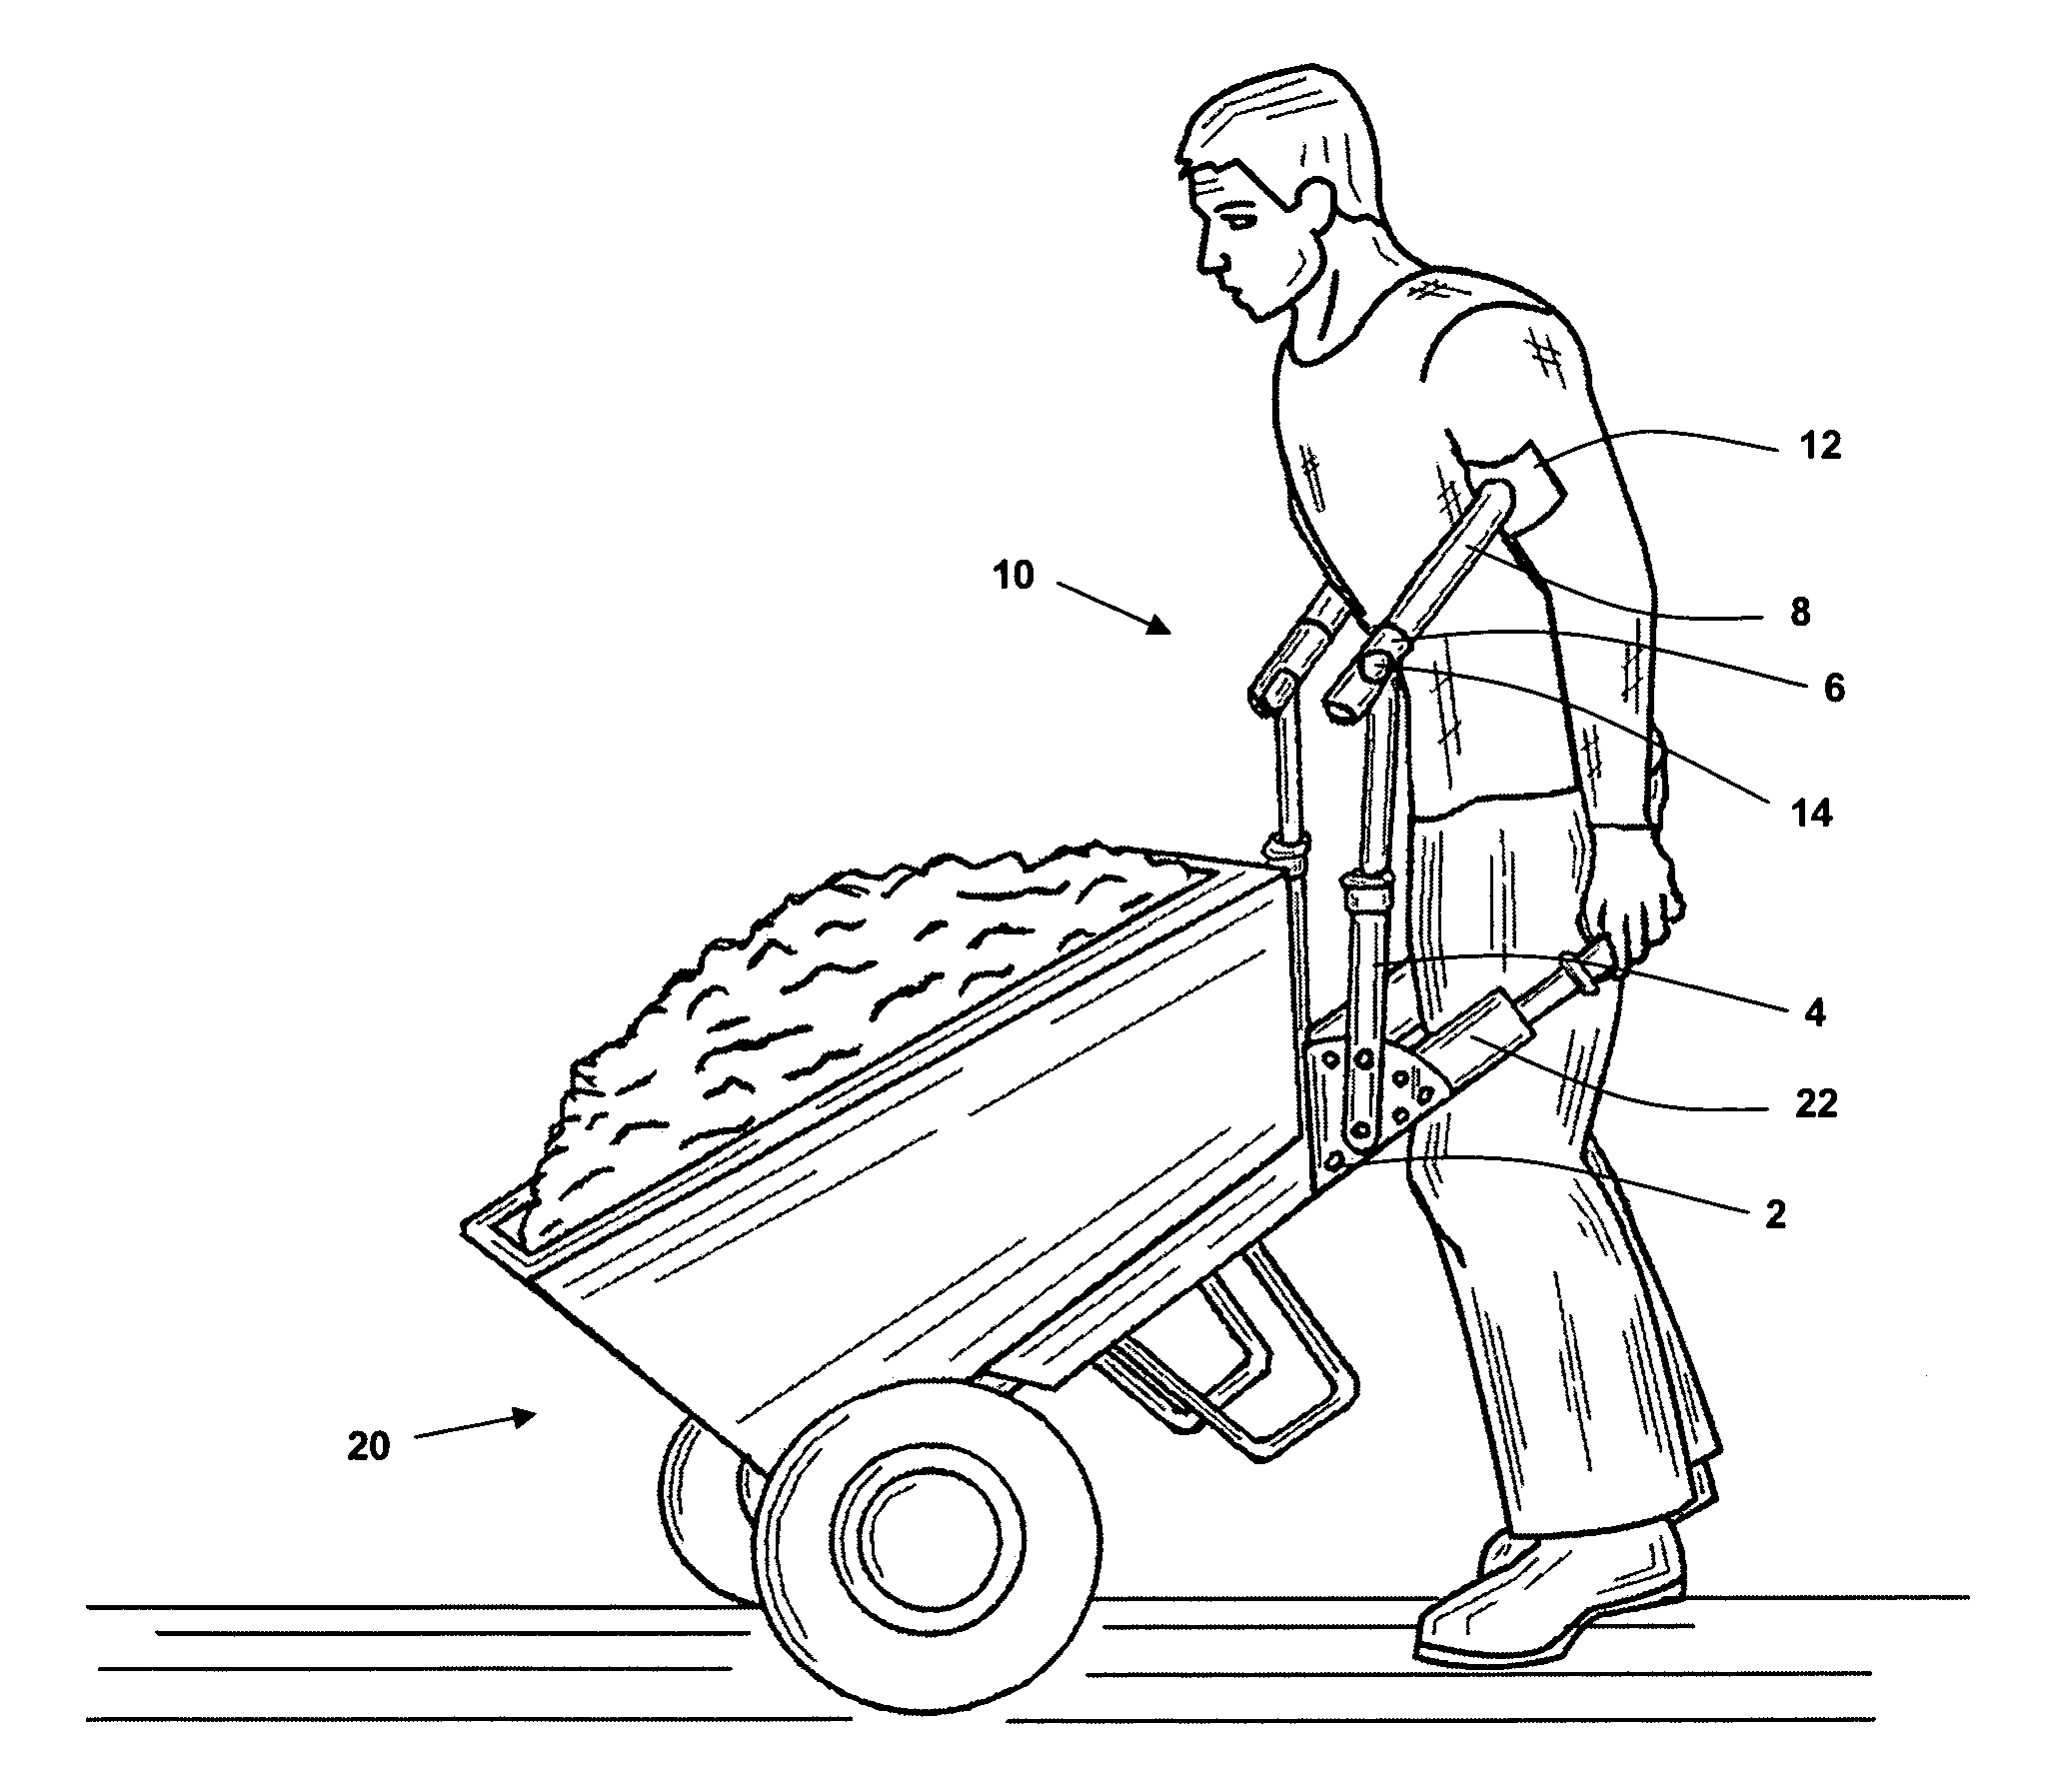 Apparatus for assisting in pushing a wheelbarrow